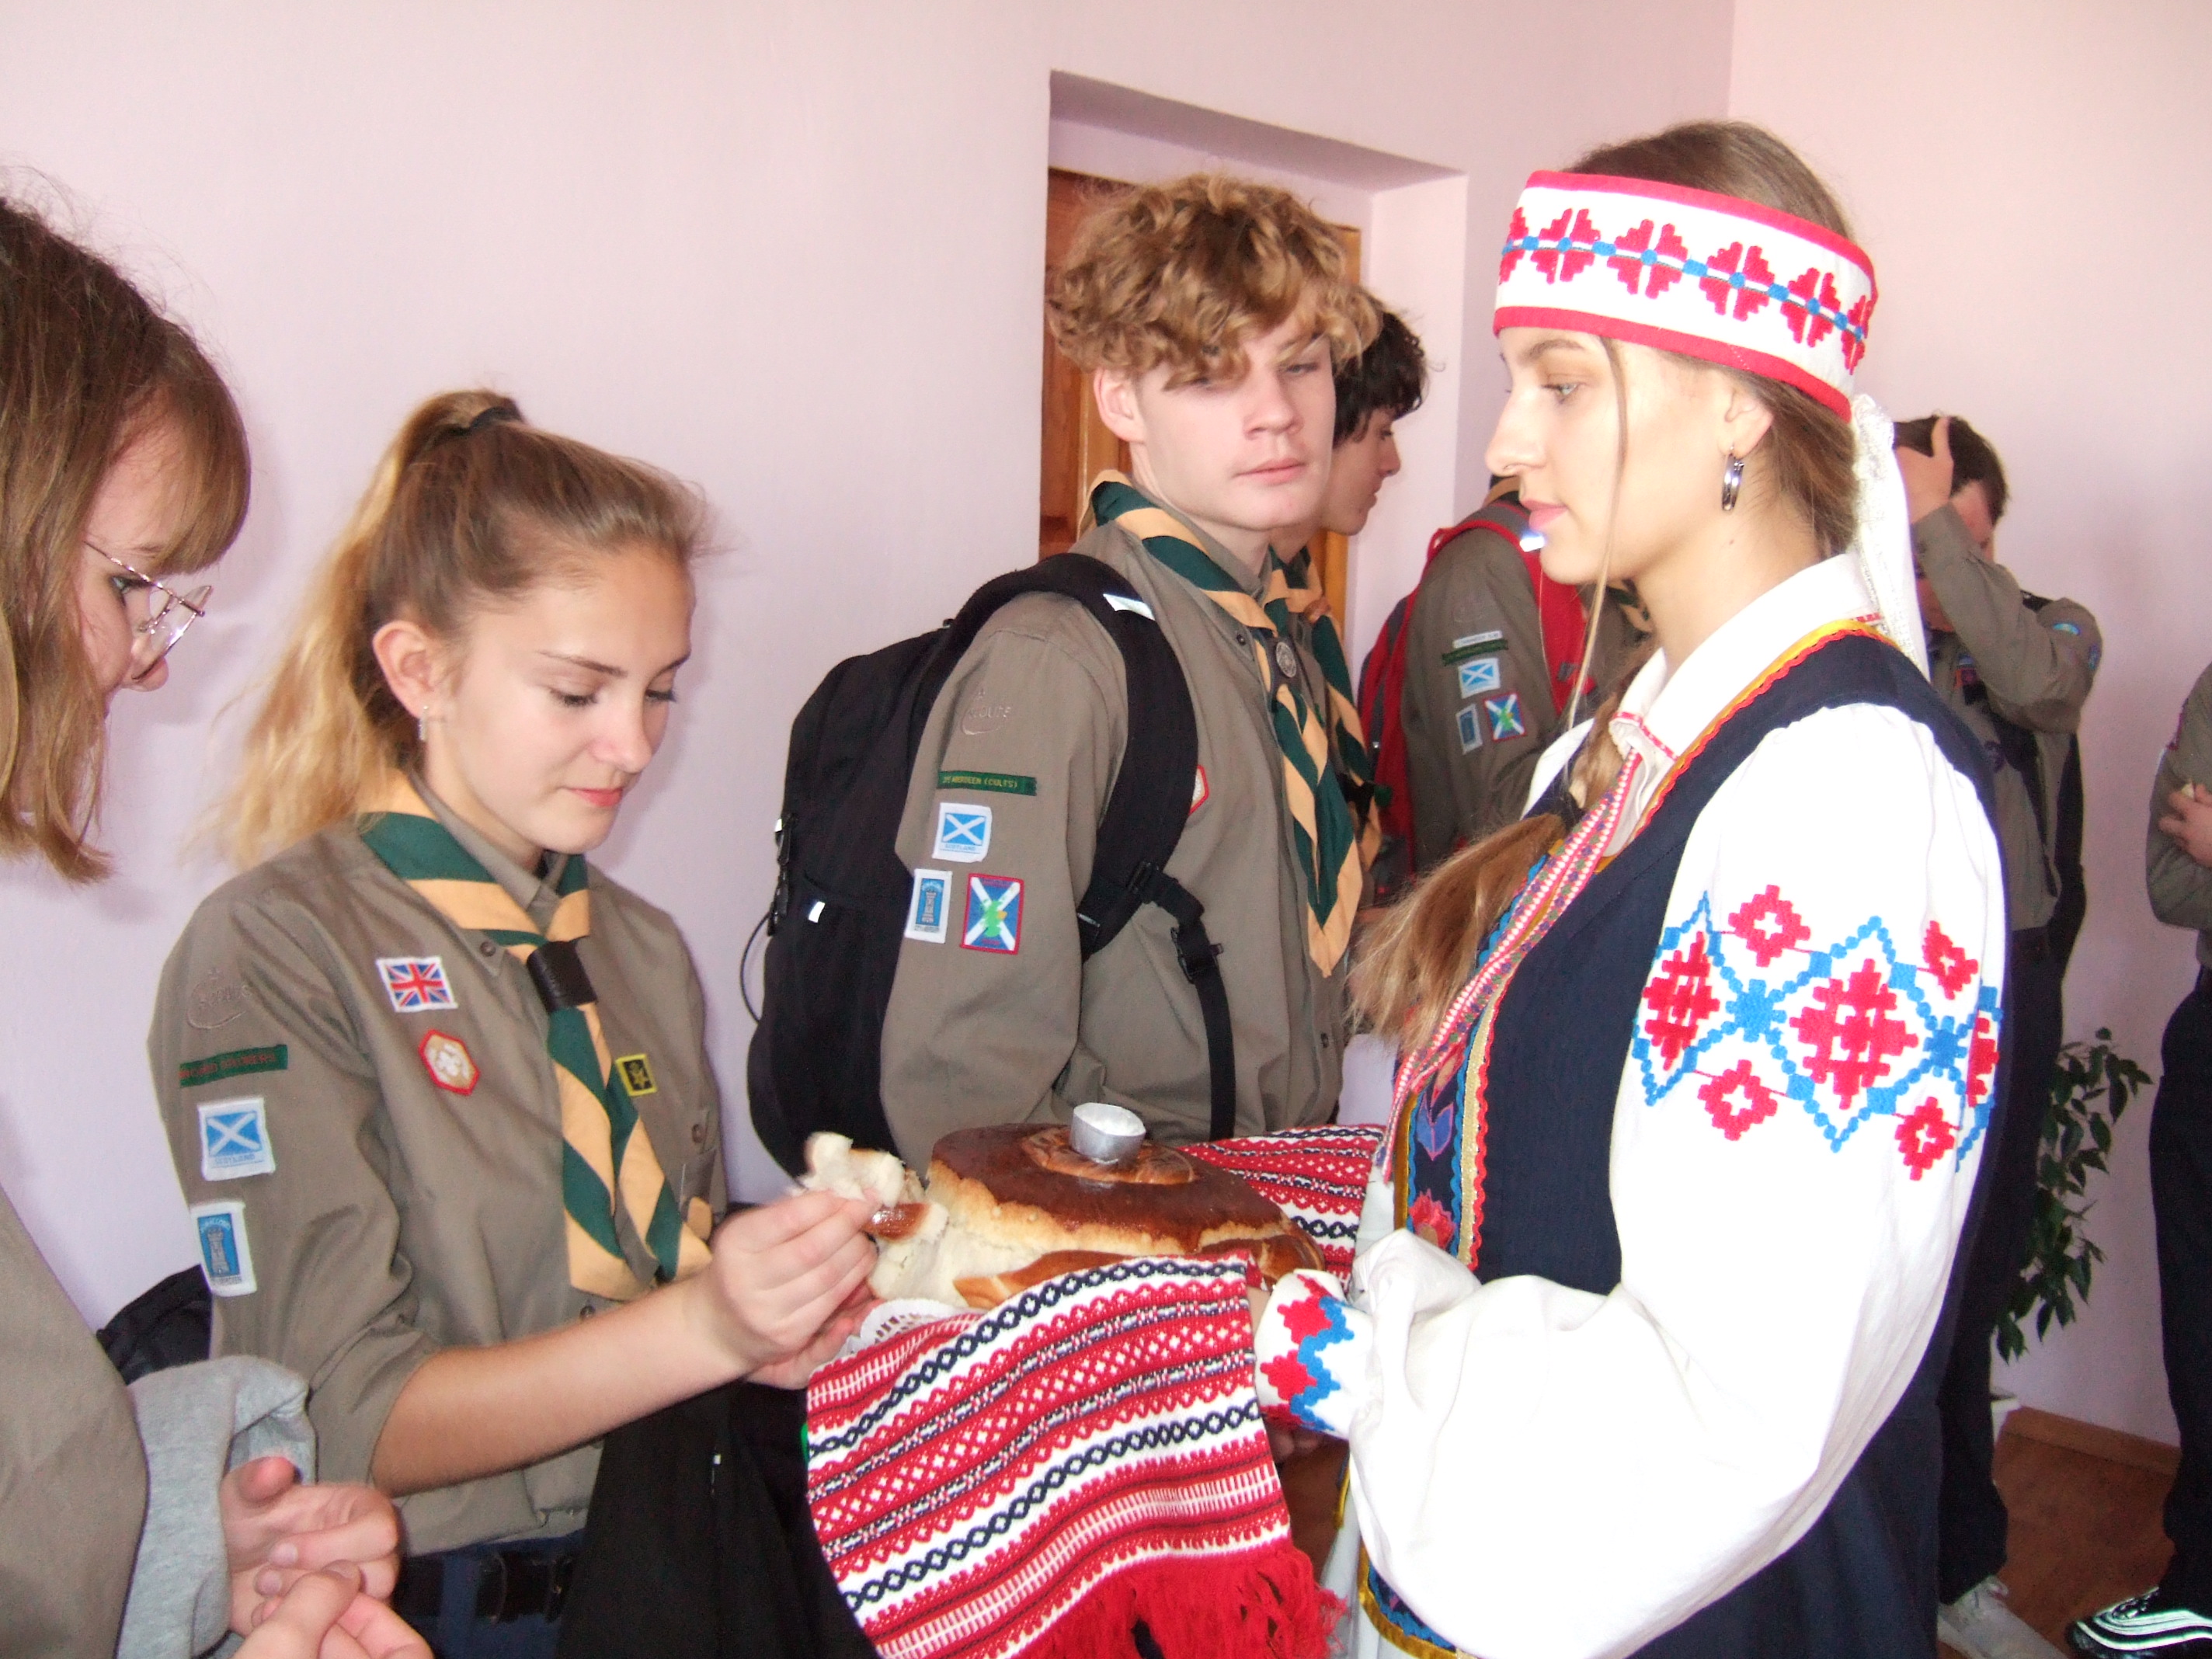 Some of the Young Scout Leaders